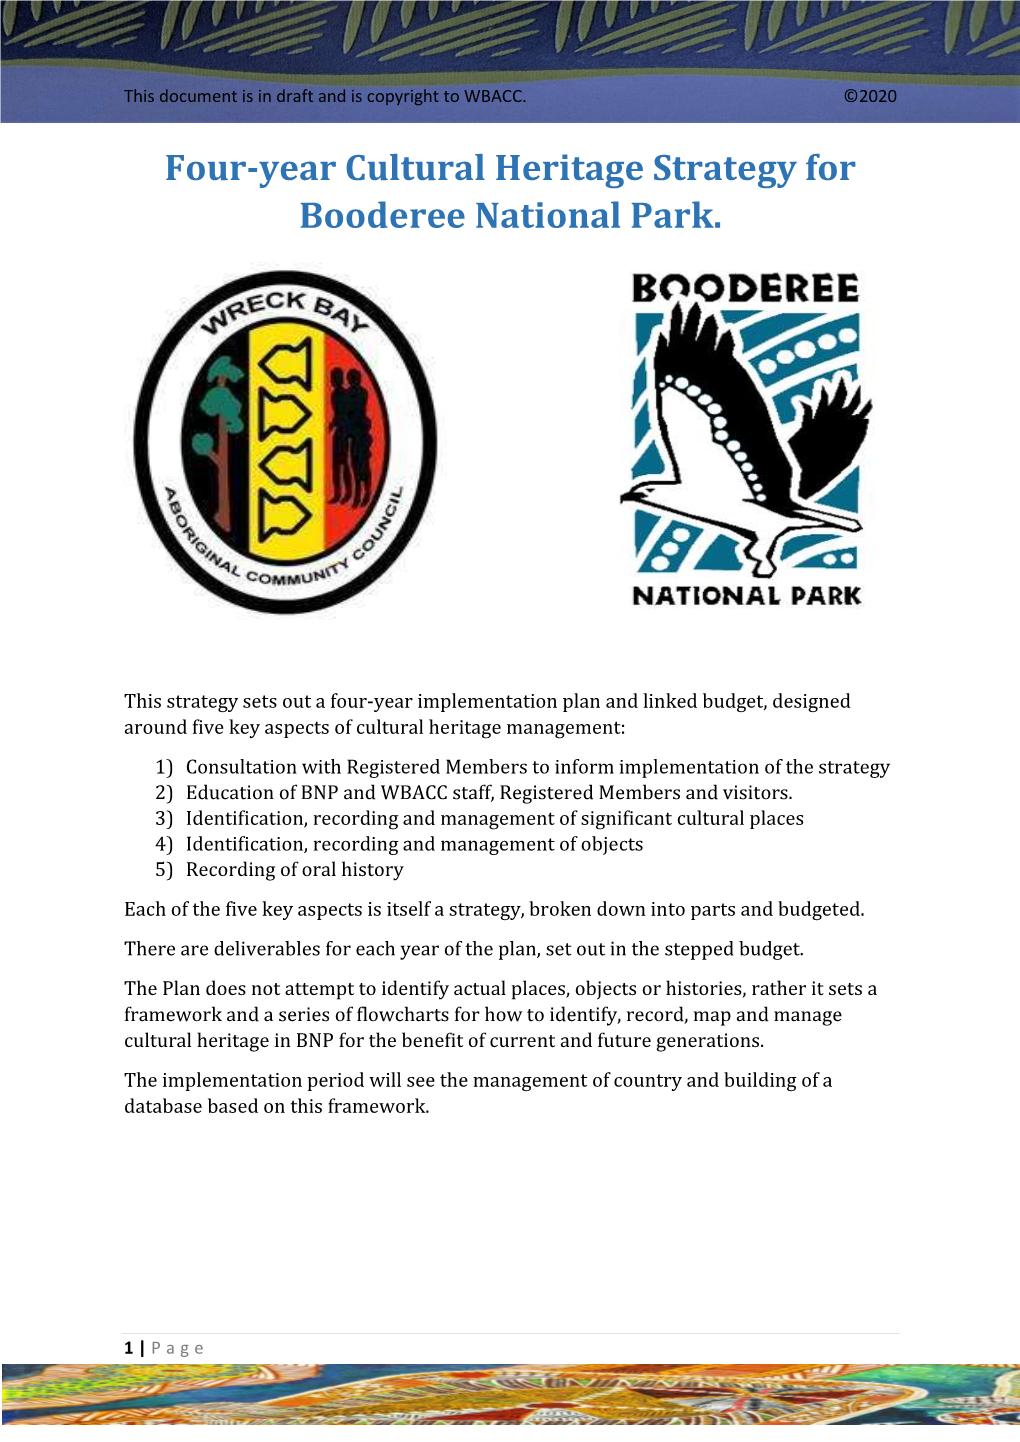 Four-Year Cultural Heritage Strategy for Booderee National Park